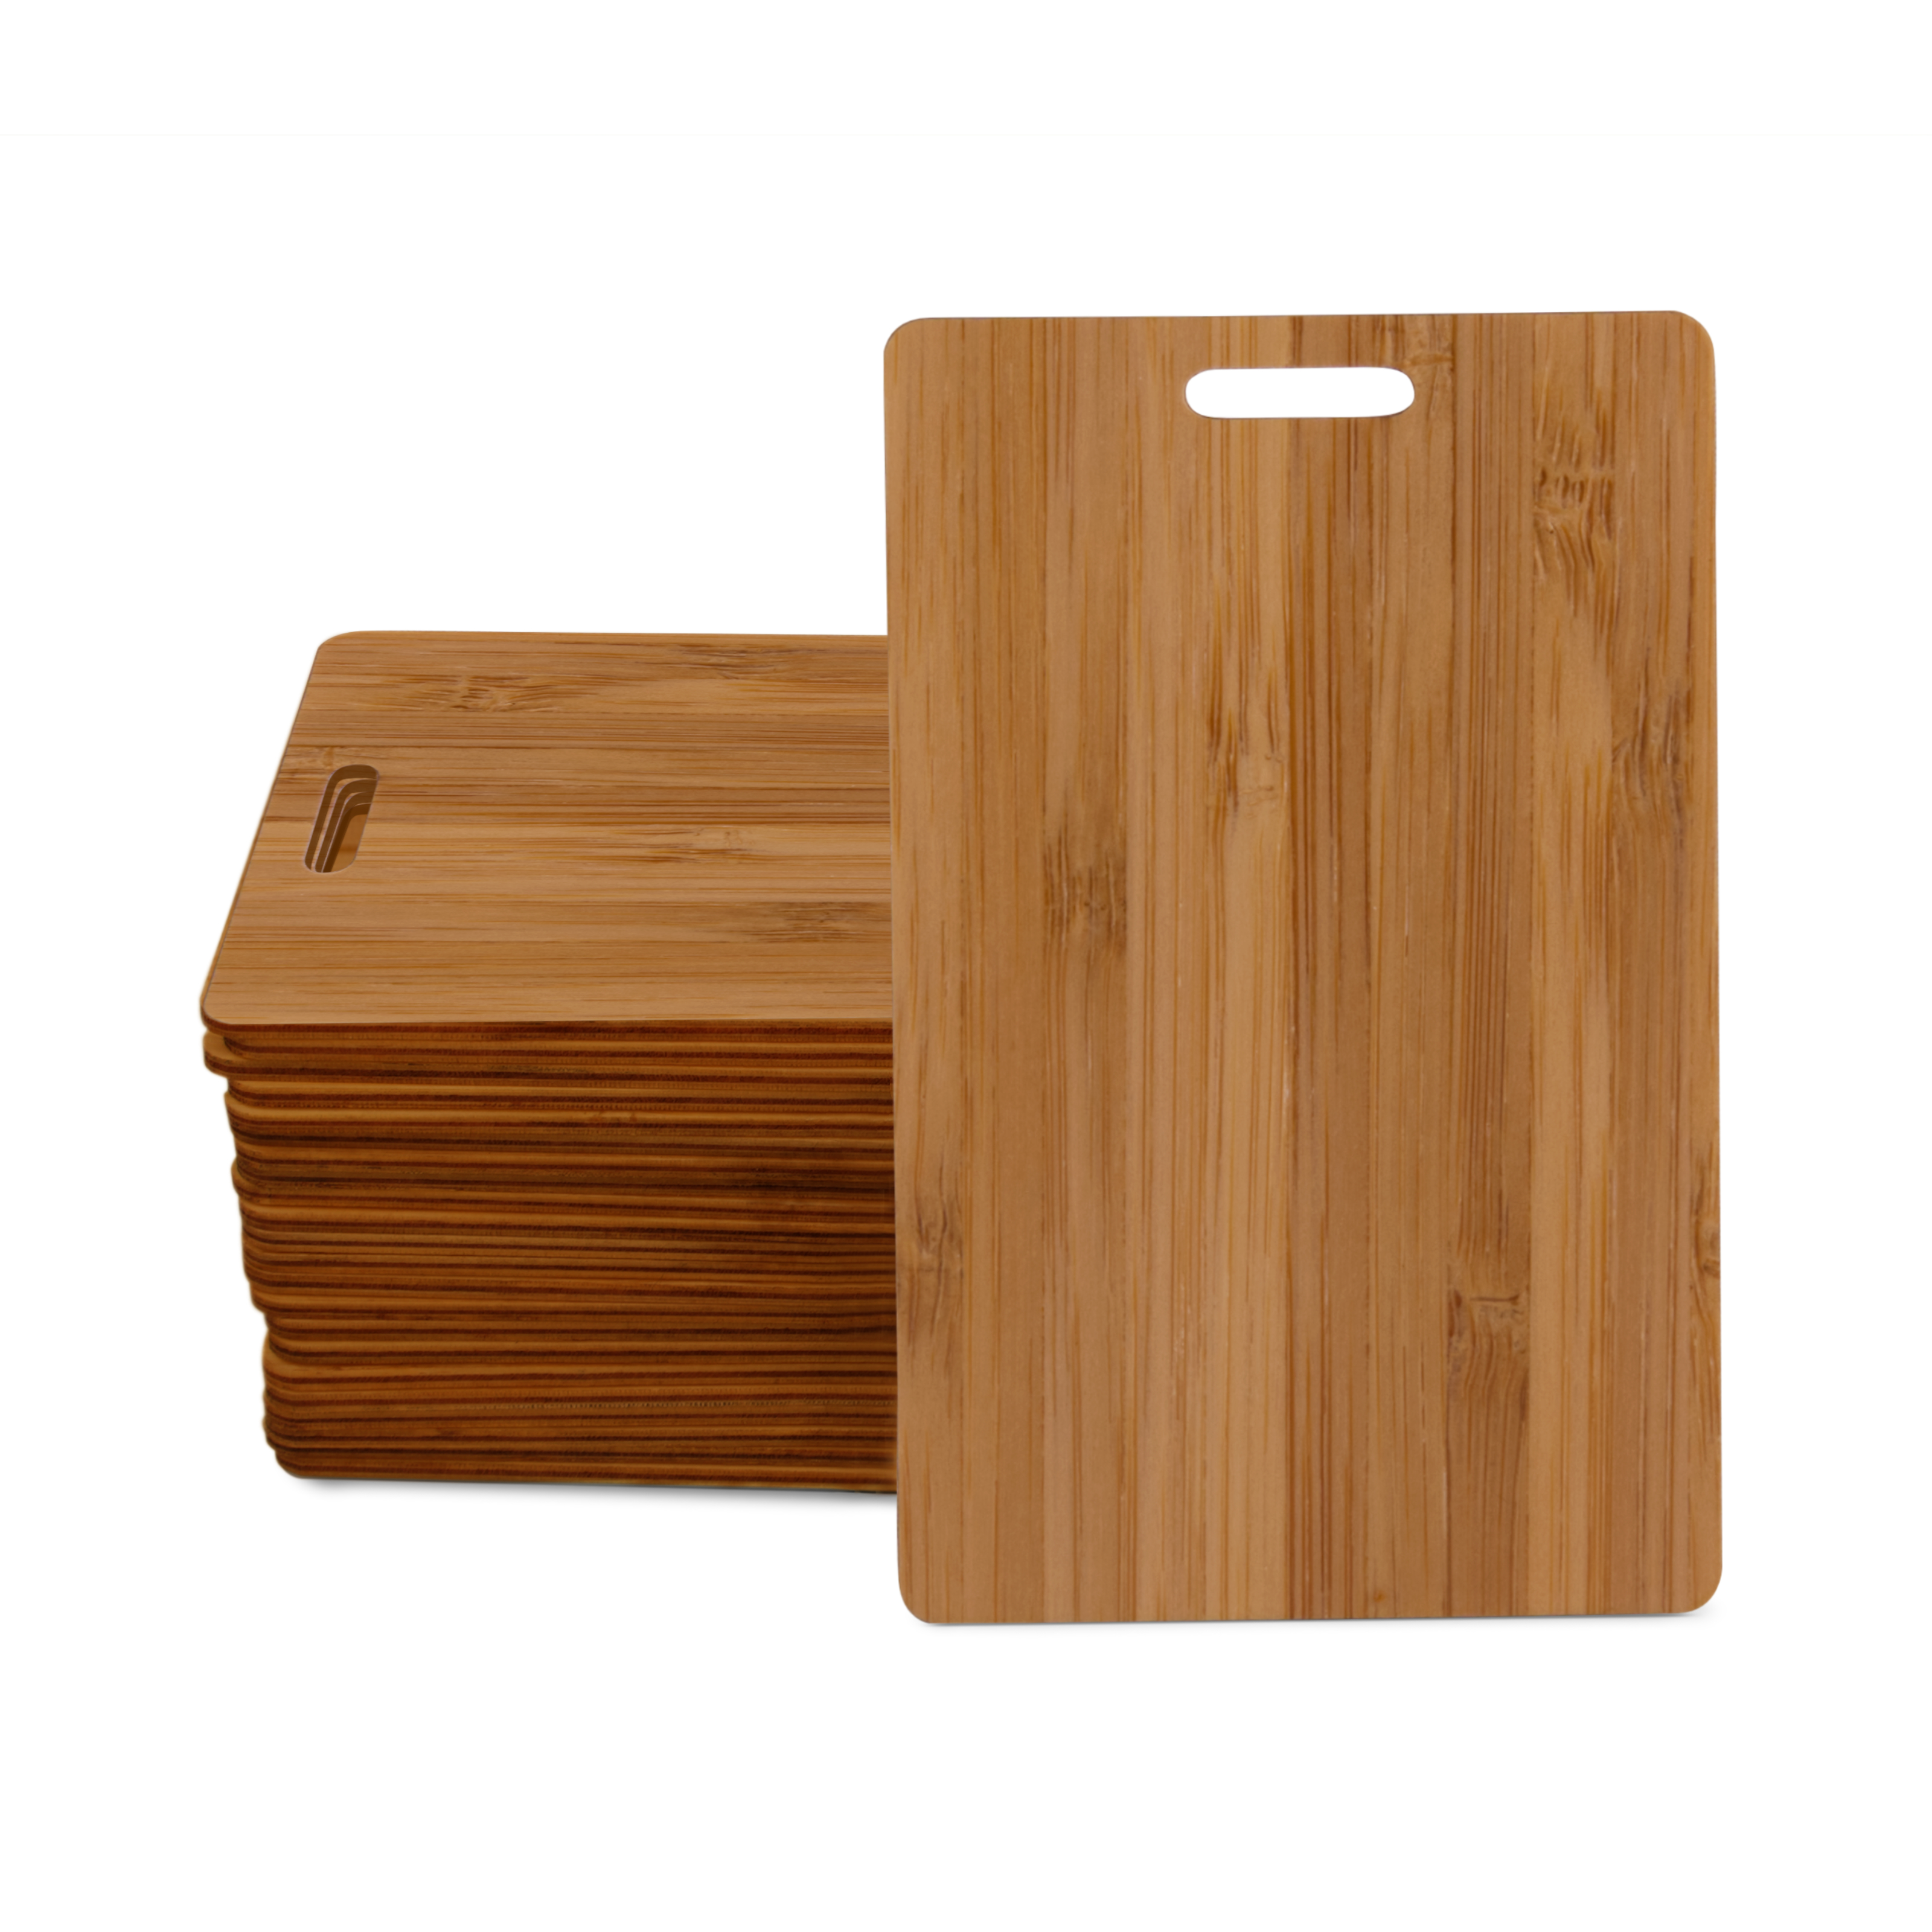 NFC card bamboo - 85,6 x 54 mm - NTAG213 - 180 byte - wood look - portrait format with slot